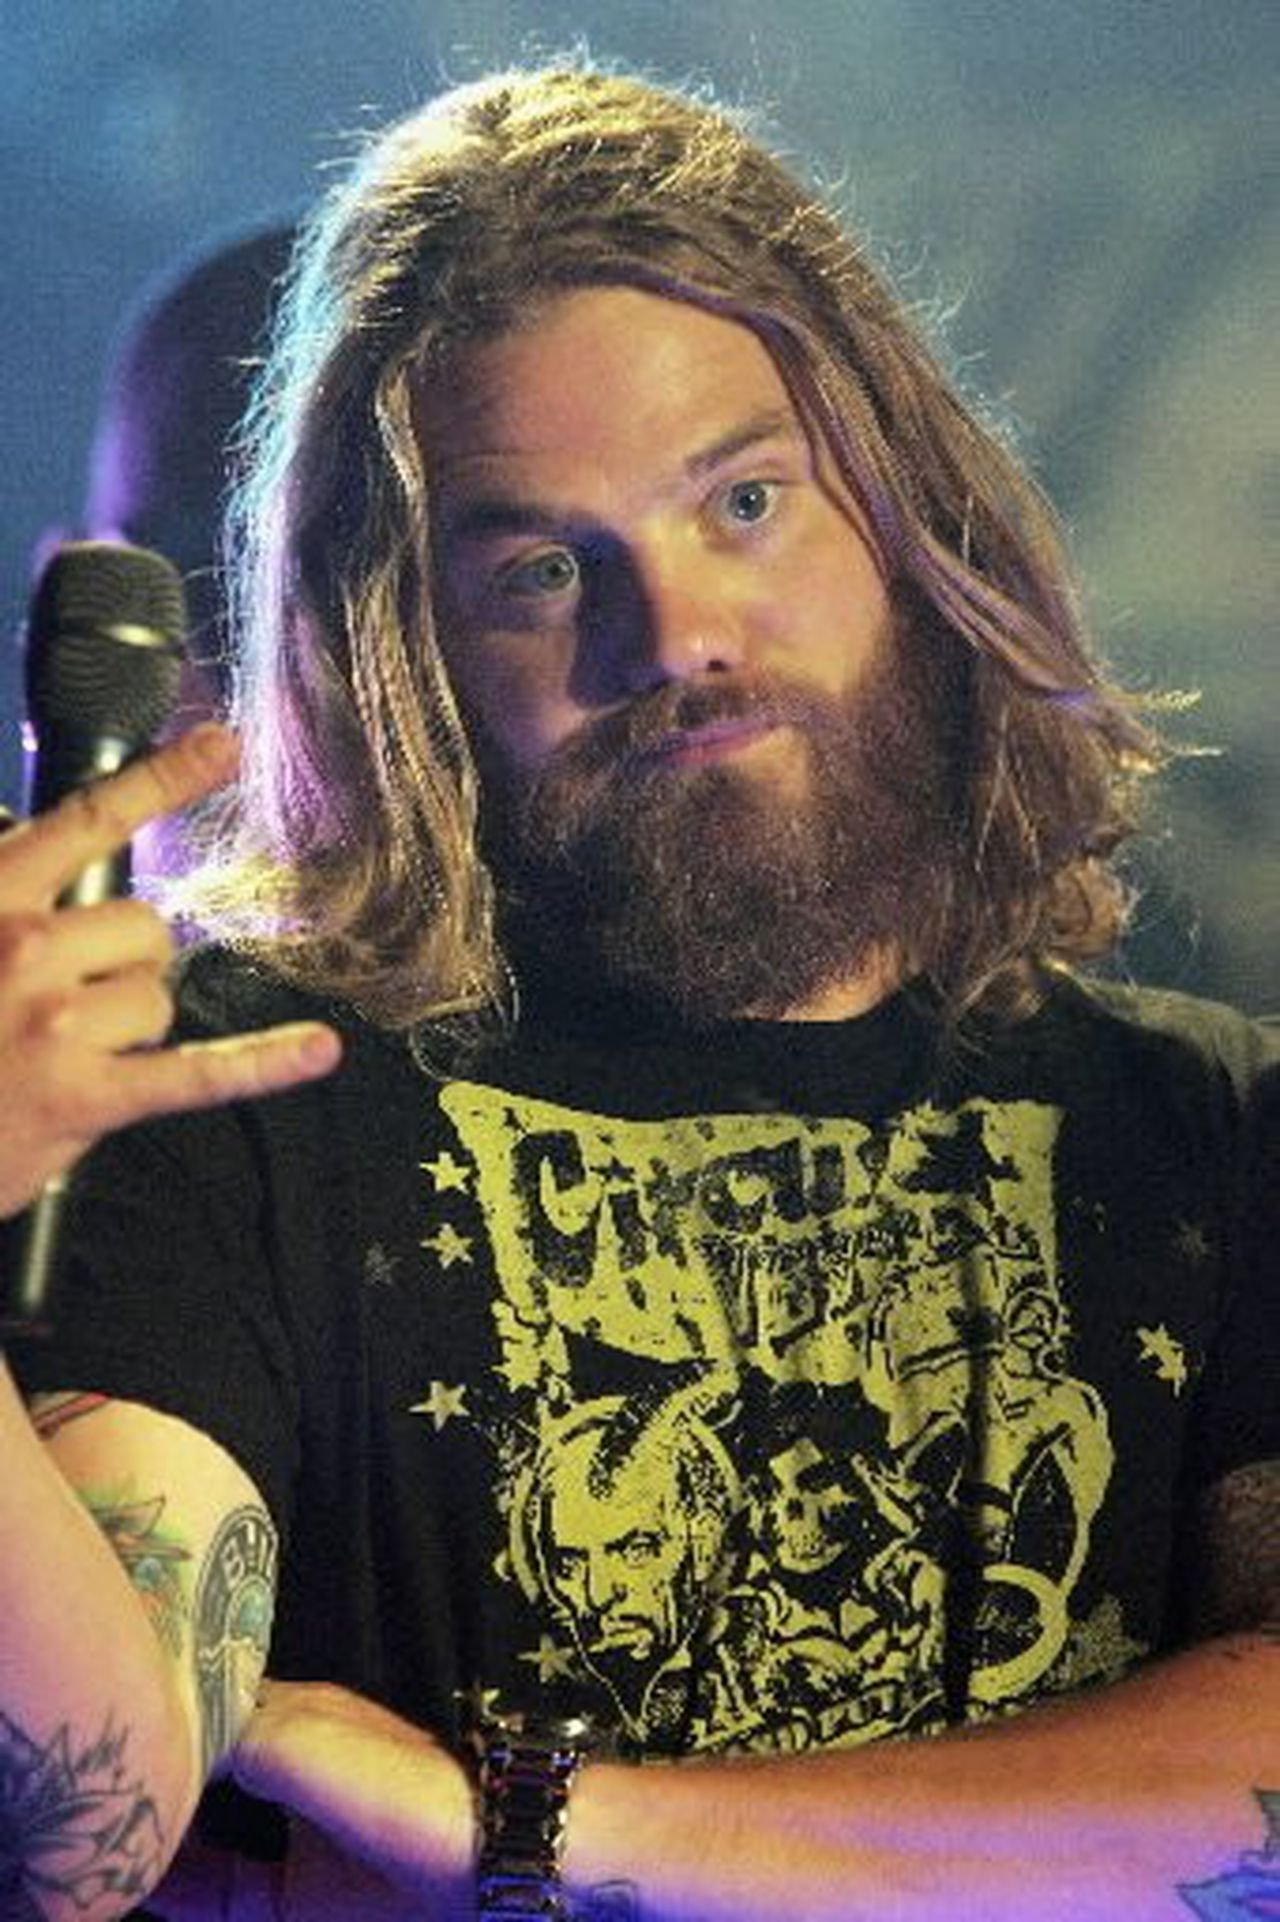 Happy birthday bro, you were literally the inspiration of me wanting a beard as a kid.. RIP Ryan Dunn 